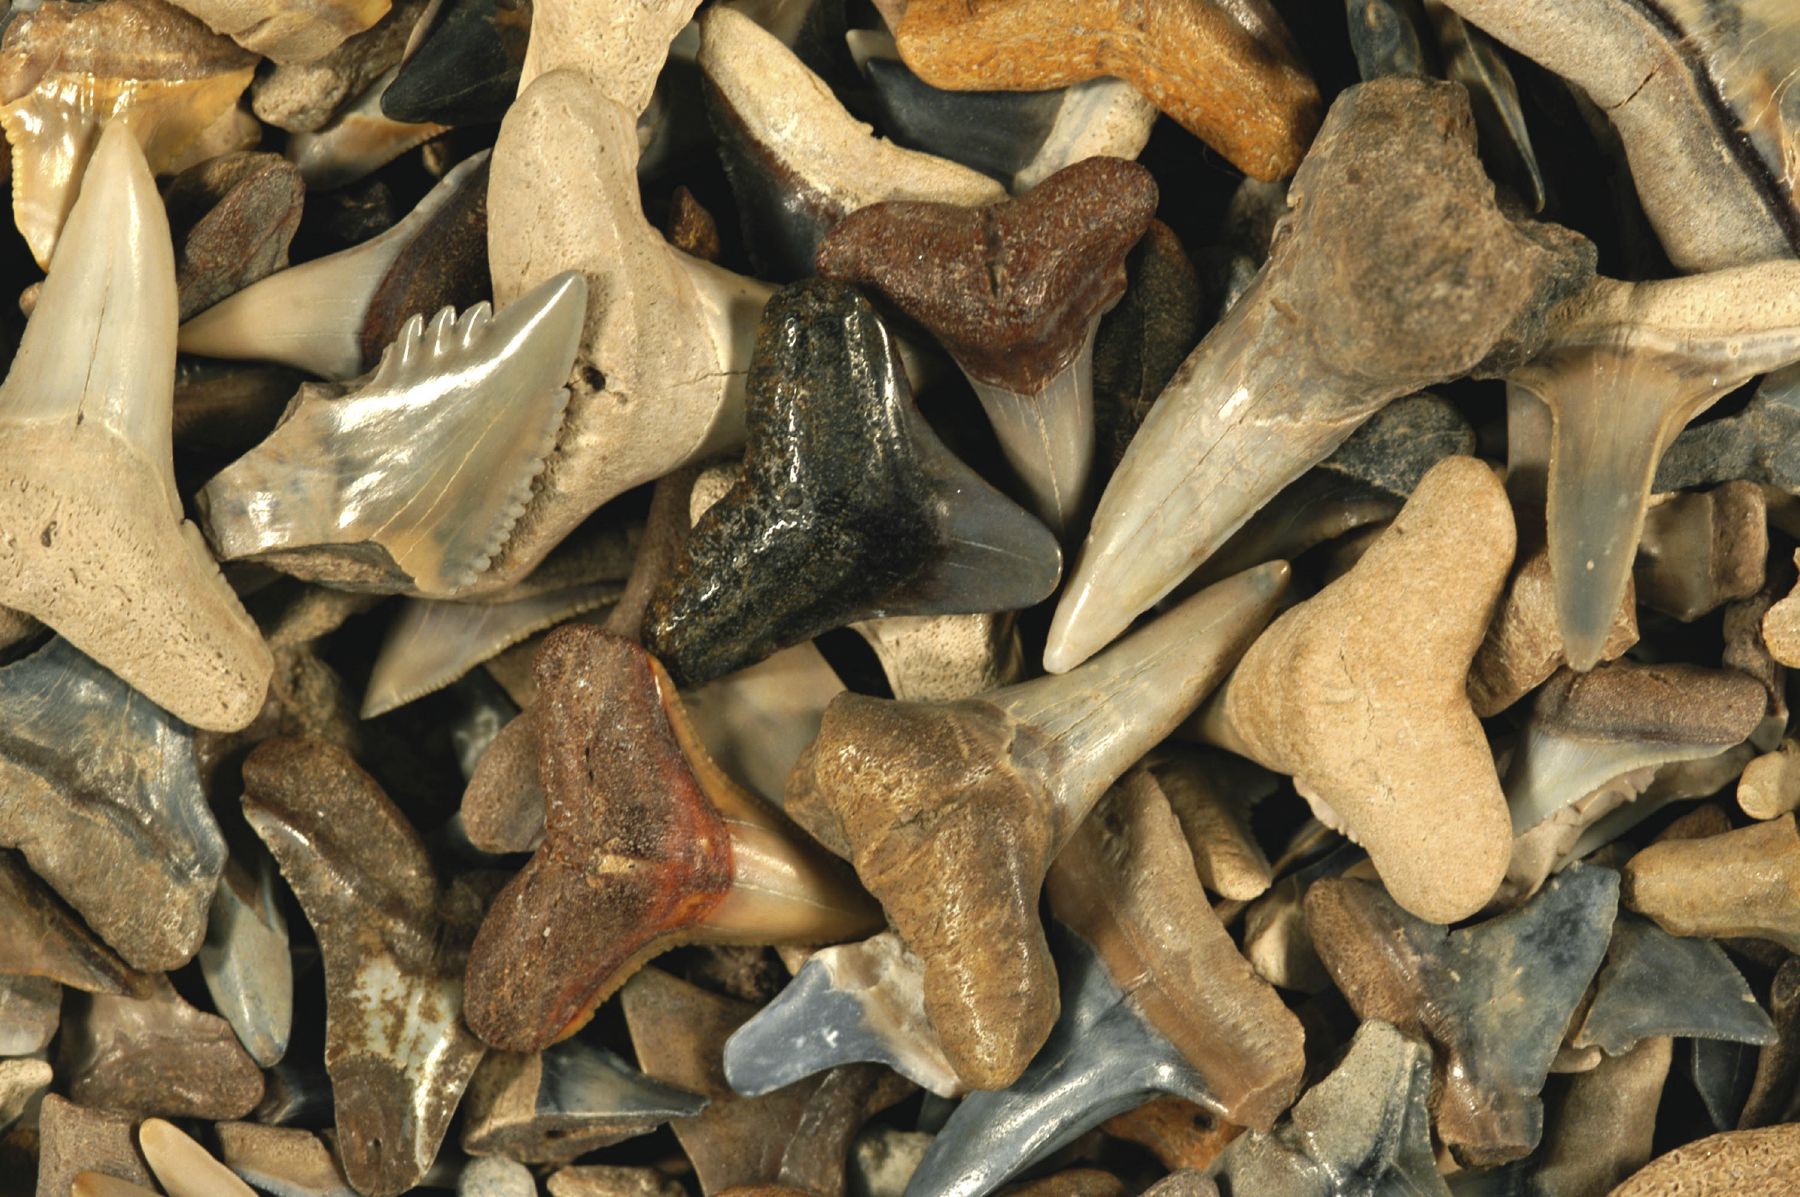 Images Of Sharks Teeth